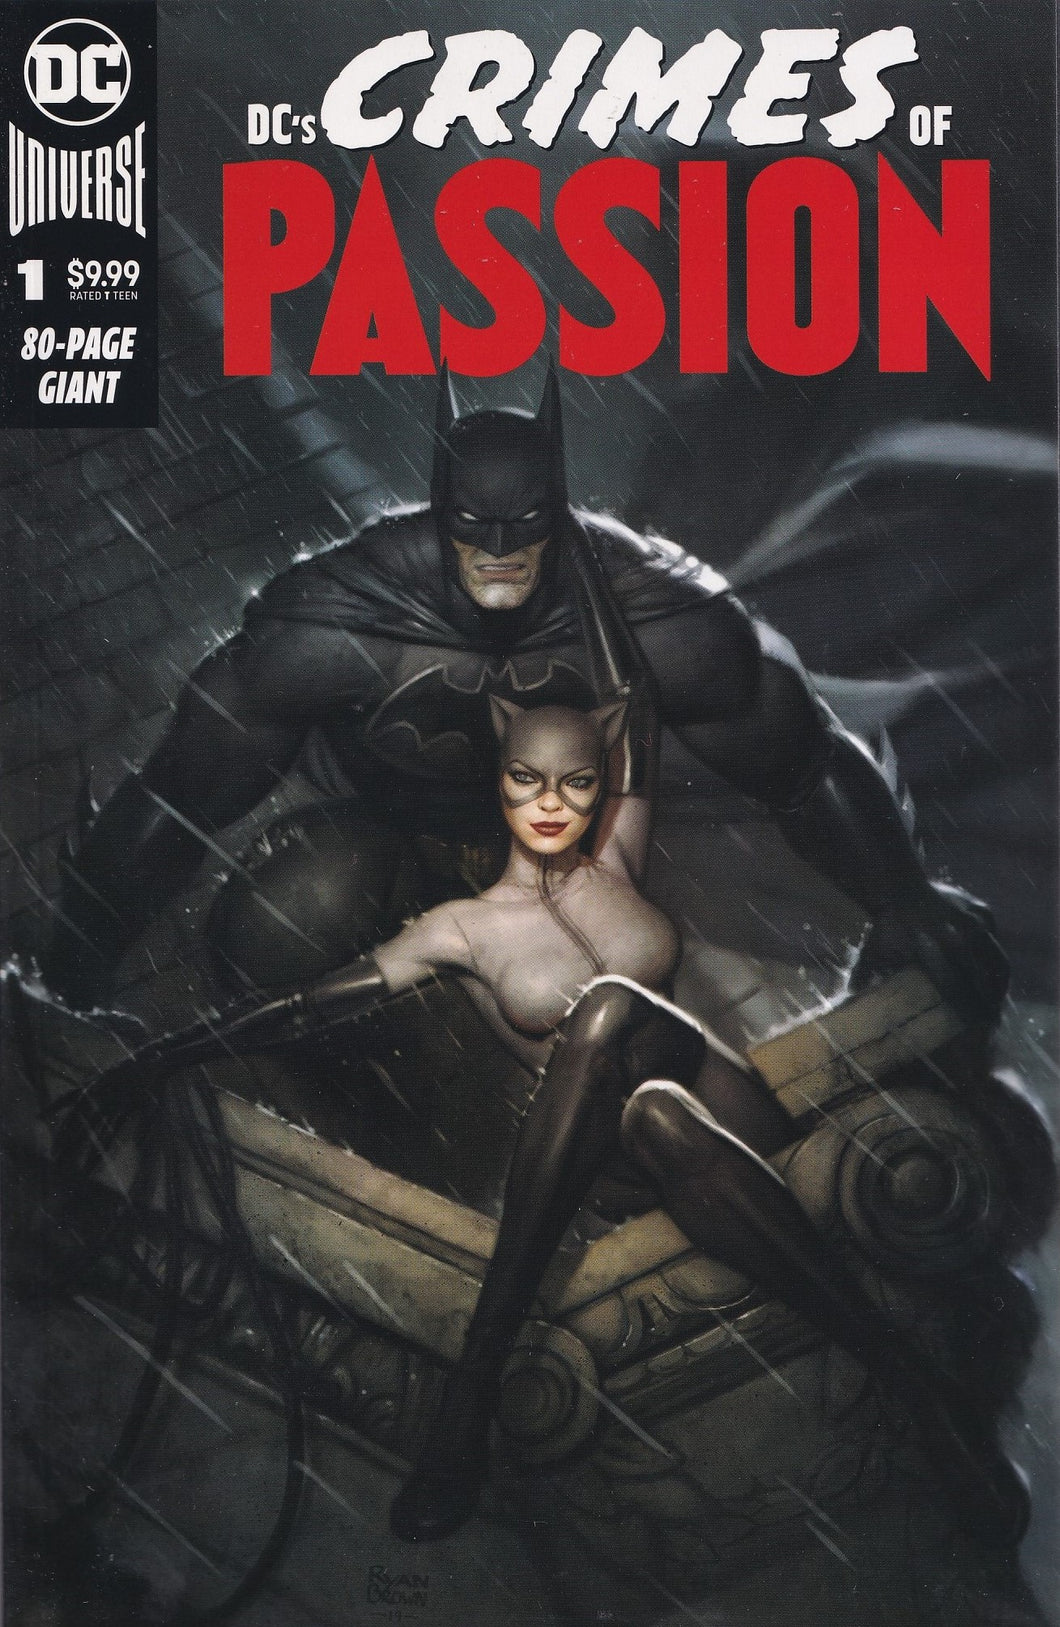 DC'S CRIMES OF PASSION #1 (RYAN BROWN EXCLUSIVE VARIANT)(2020) COMIC BOOK ~ DC